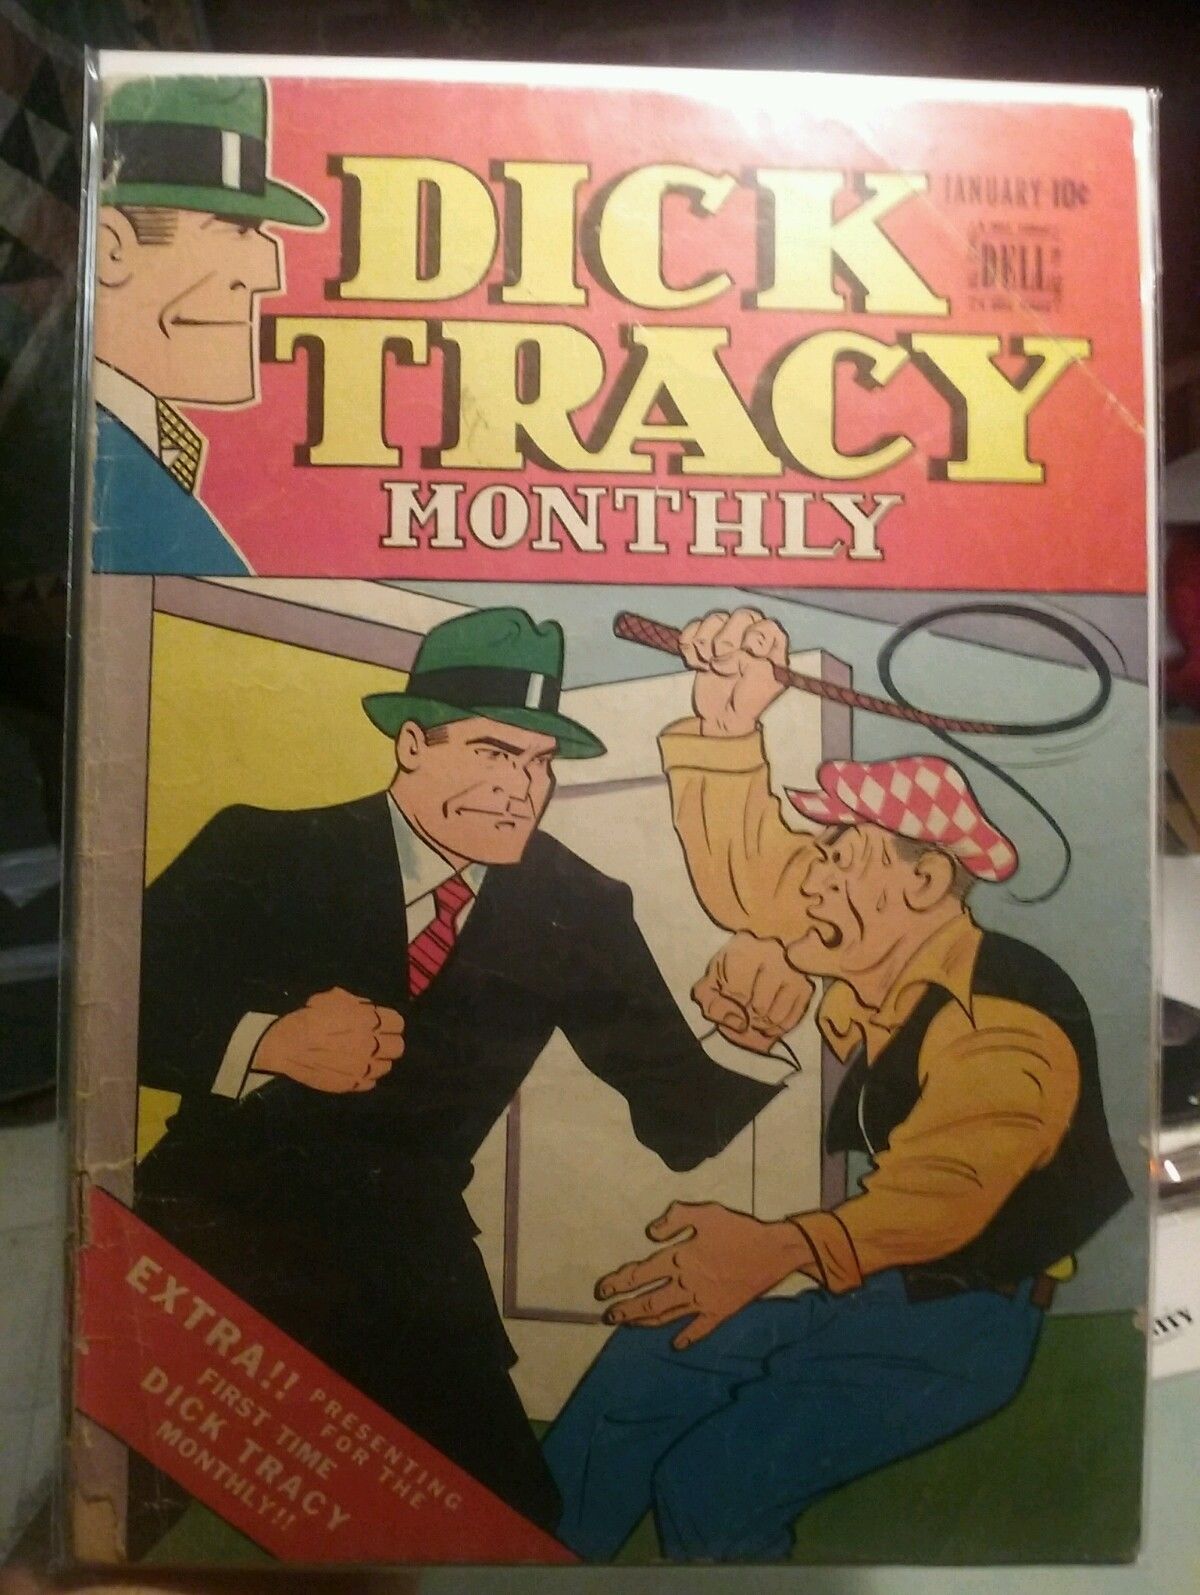 Dick Tracy Monthly #1 (Jan 1948, Dell)